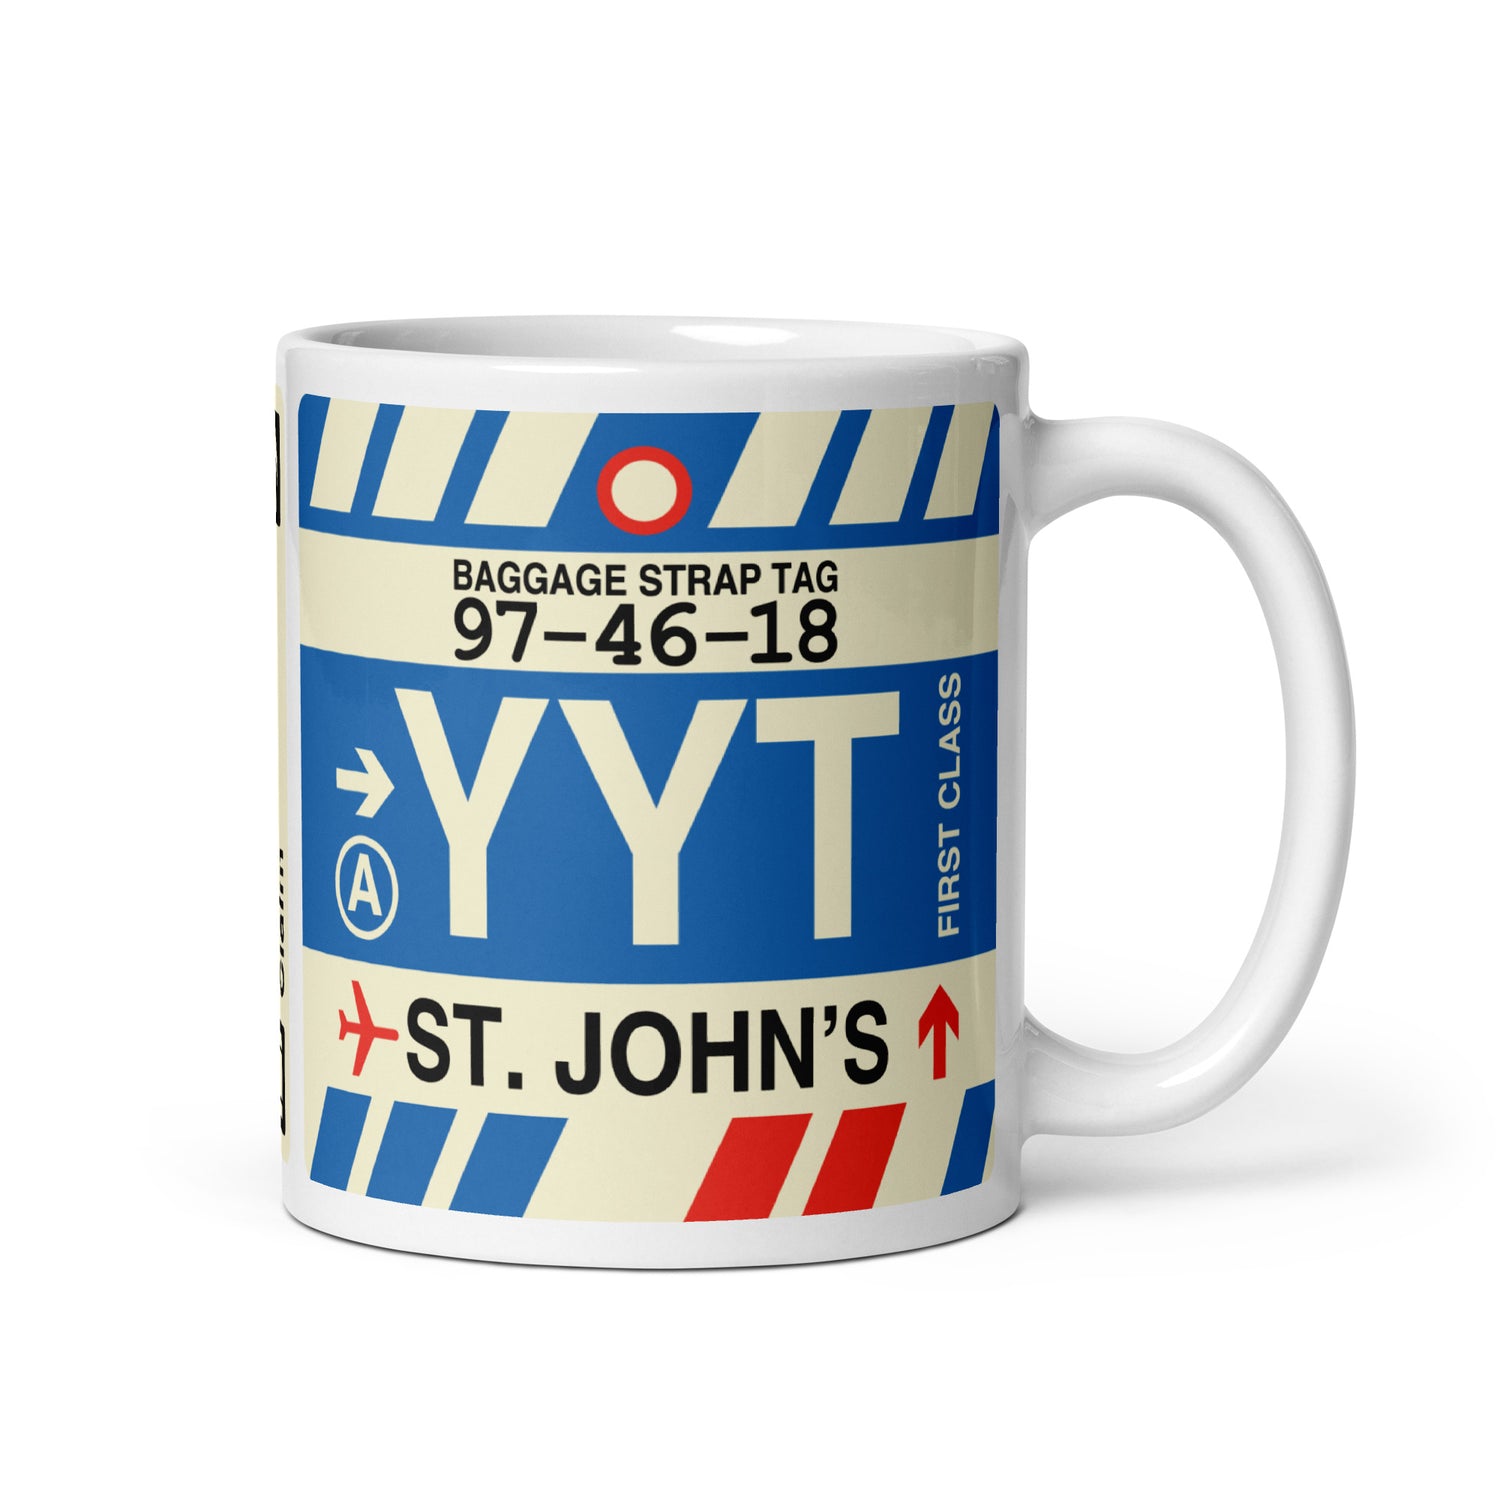 St. John's Newfoundland and Labrador Coffee Mugs and Water Bottles • YYT Airport Code